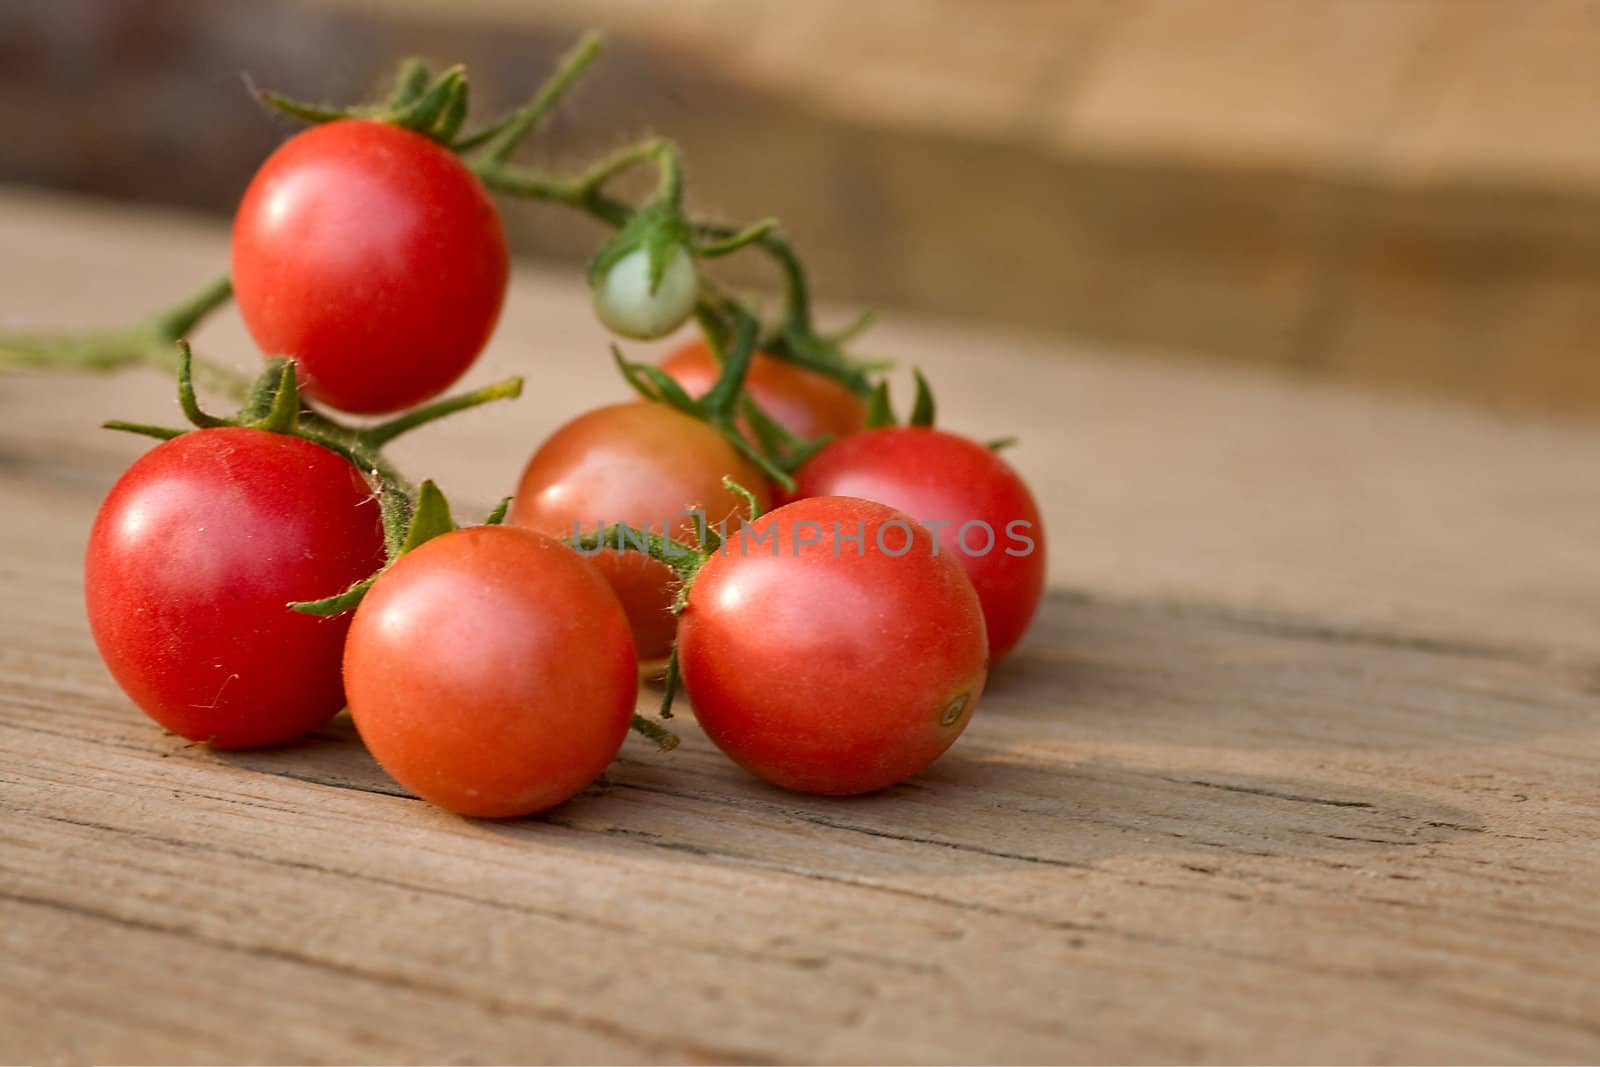 Small red cherry tomatoes in a pile.  Daily light